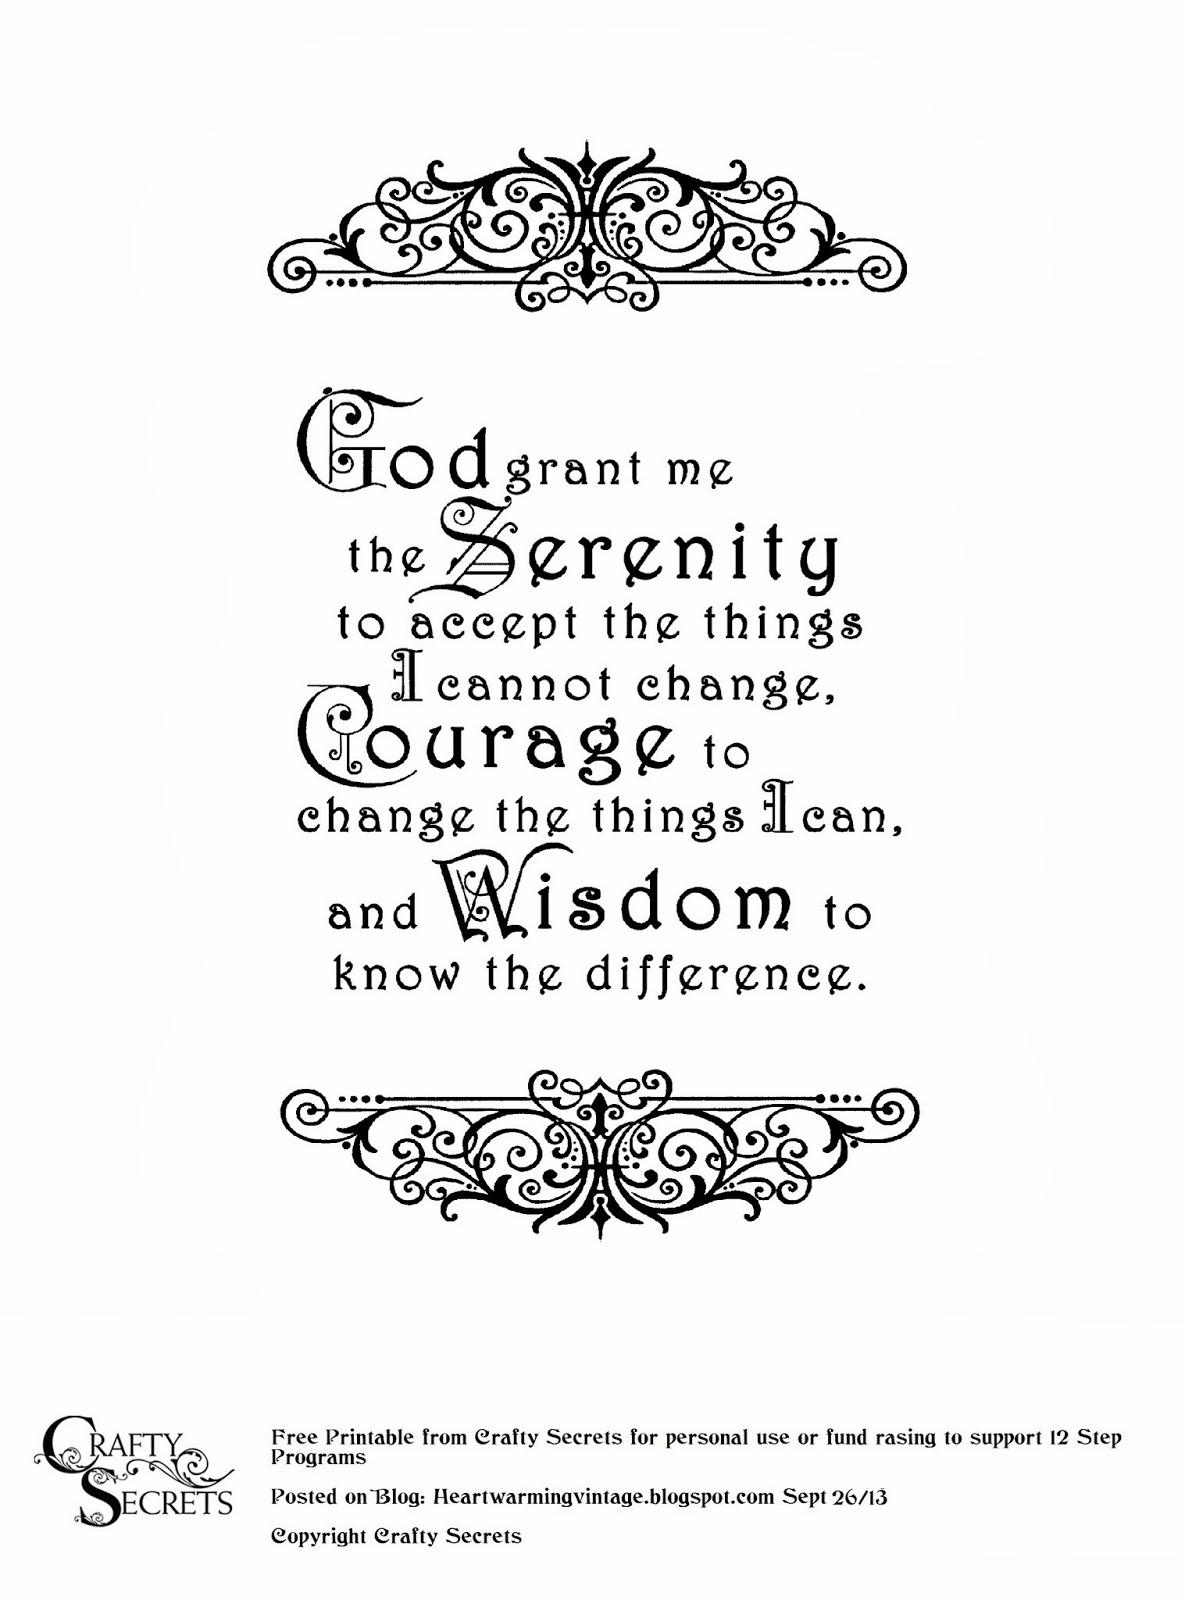 Literature & Readings: The Serenity Prayer - In The Day